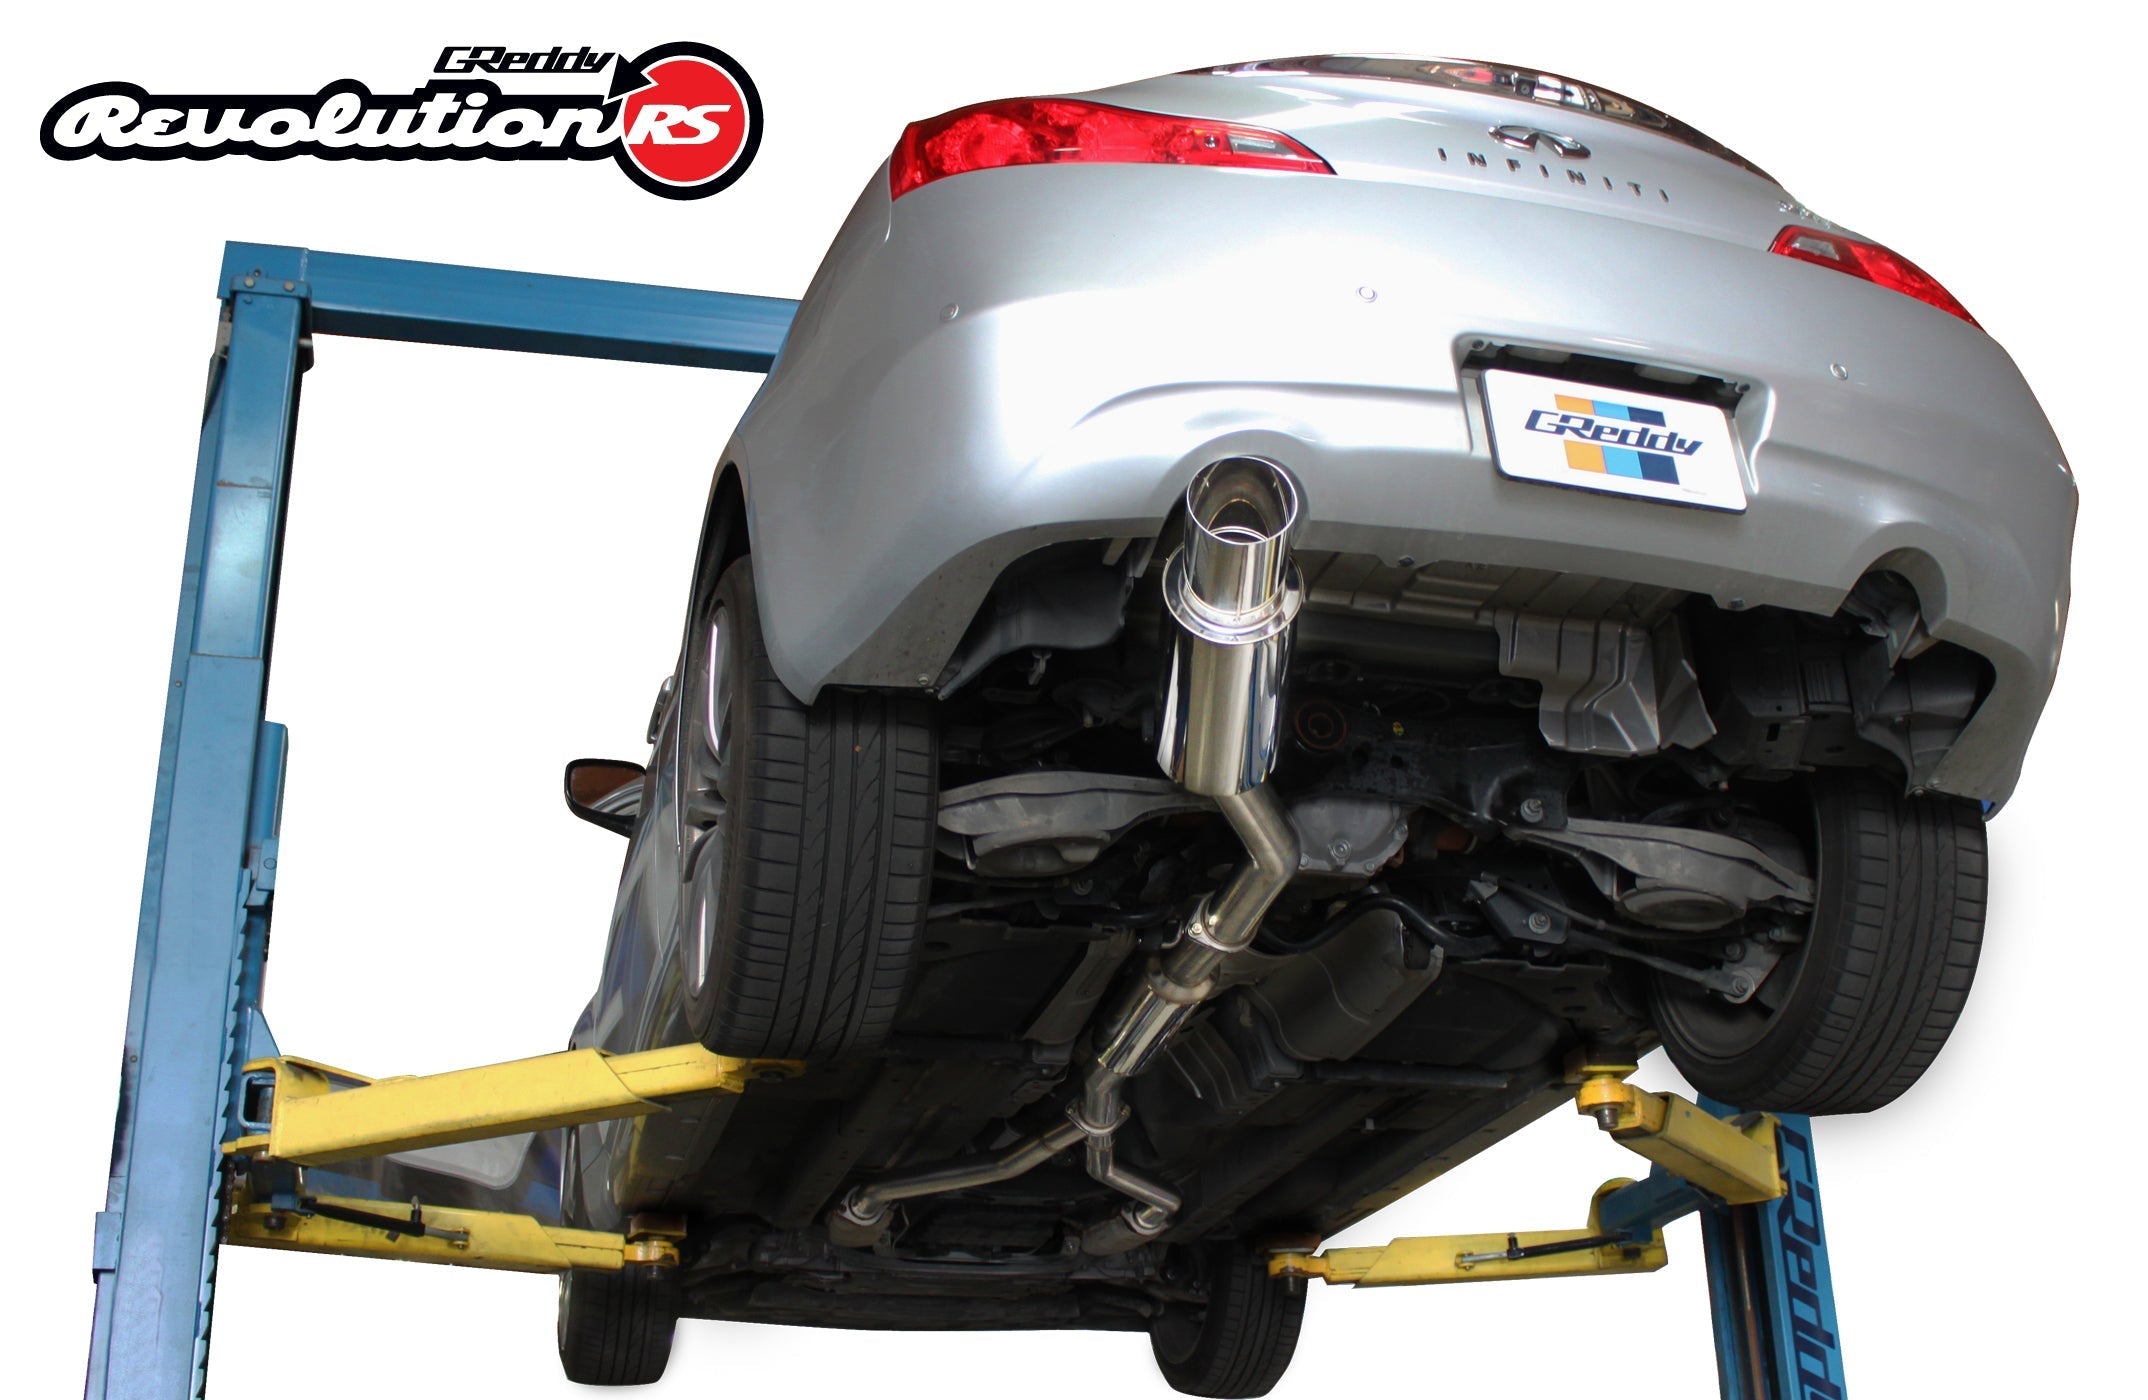 GReddy Revolution-RS Exhaust Systems - application specific